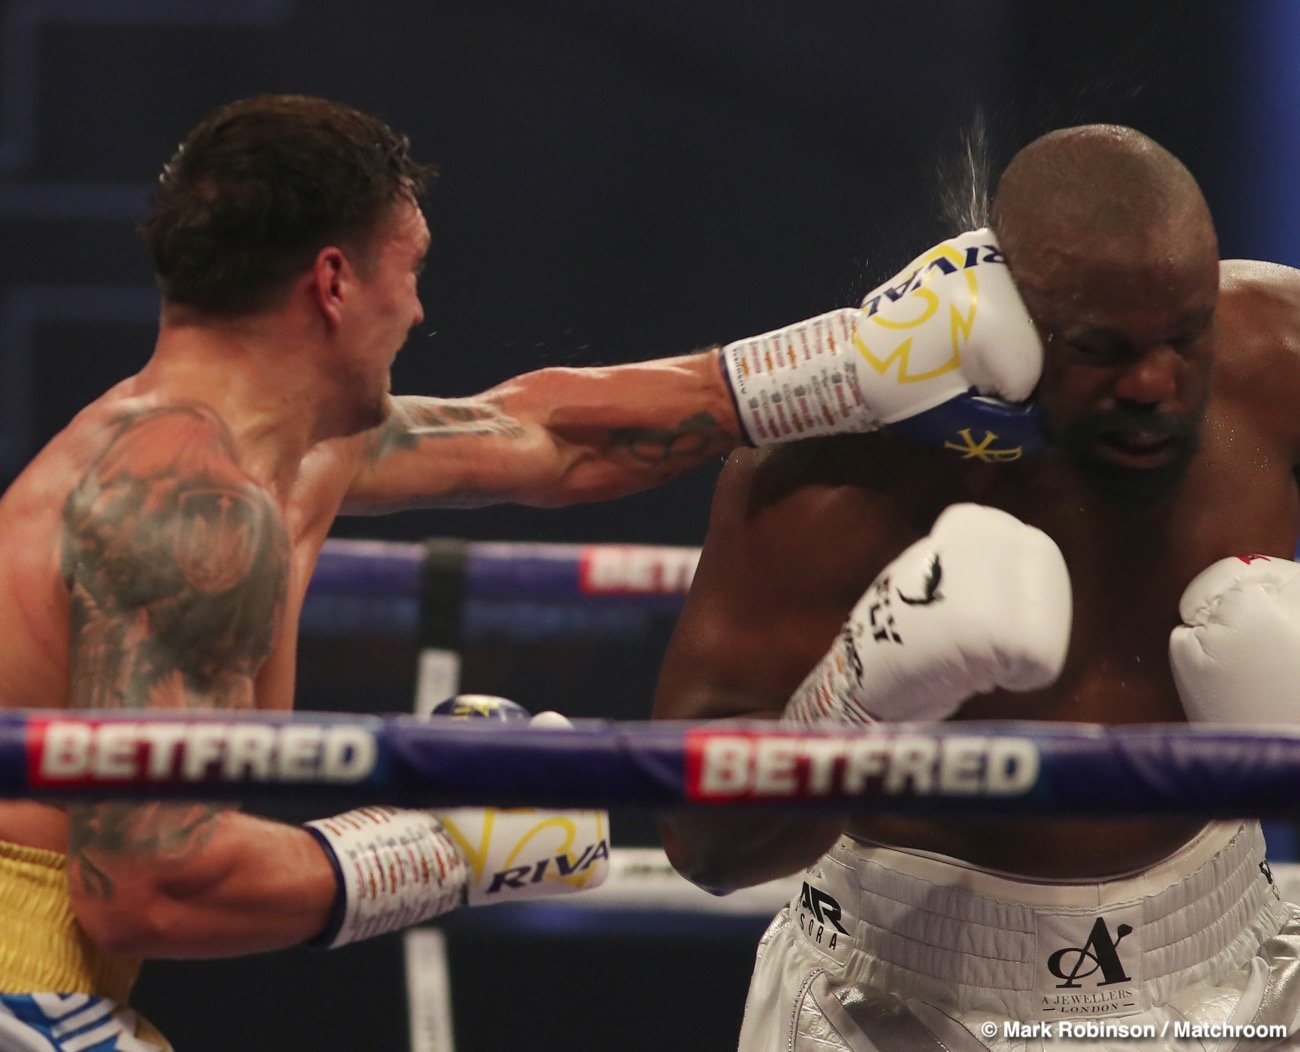 Usyk beats Chisora - Live Results From Wembley